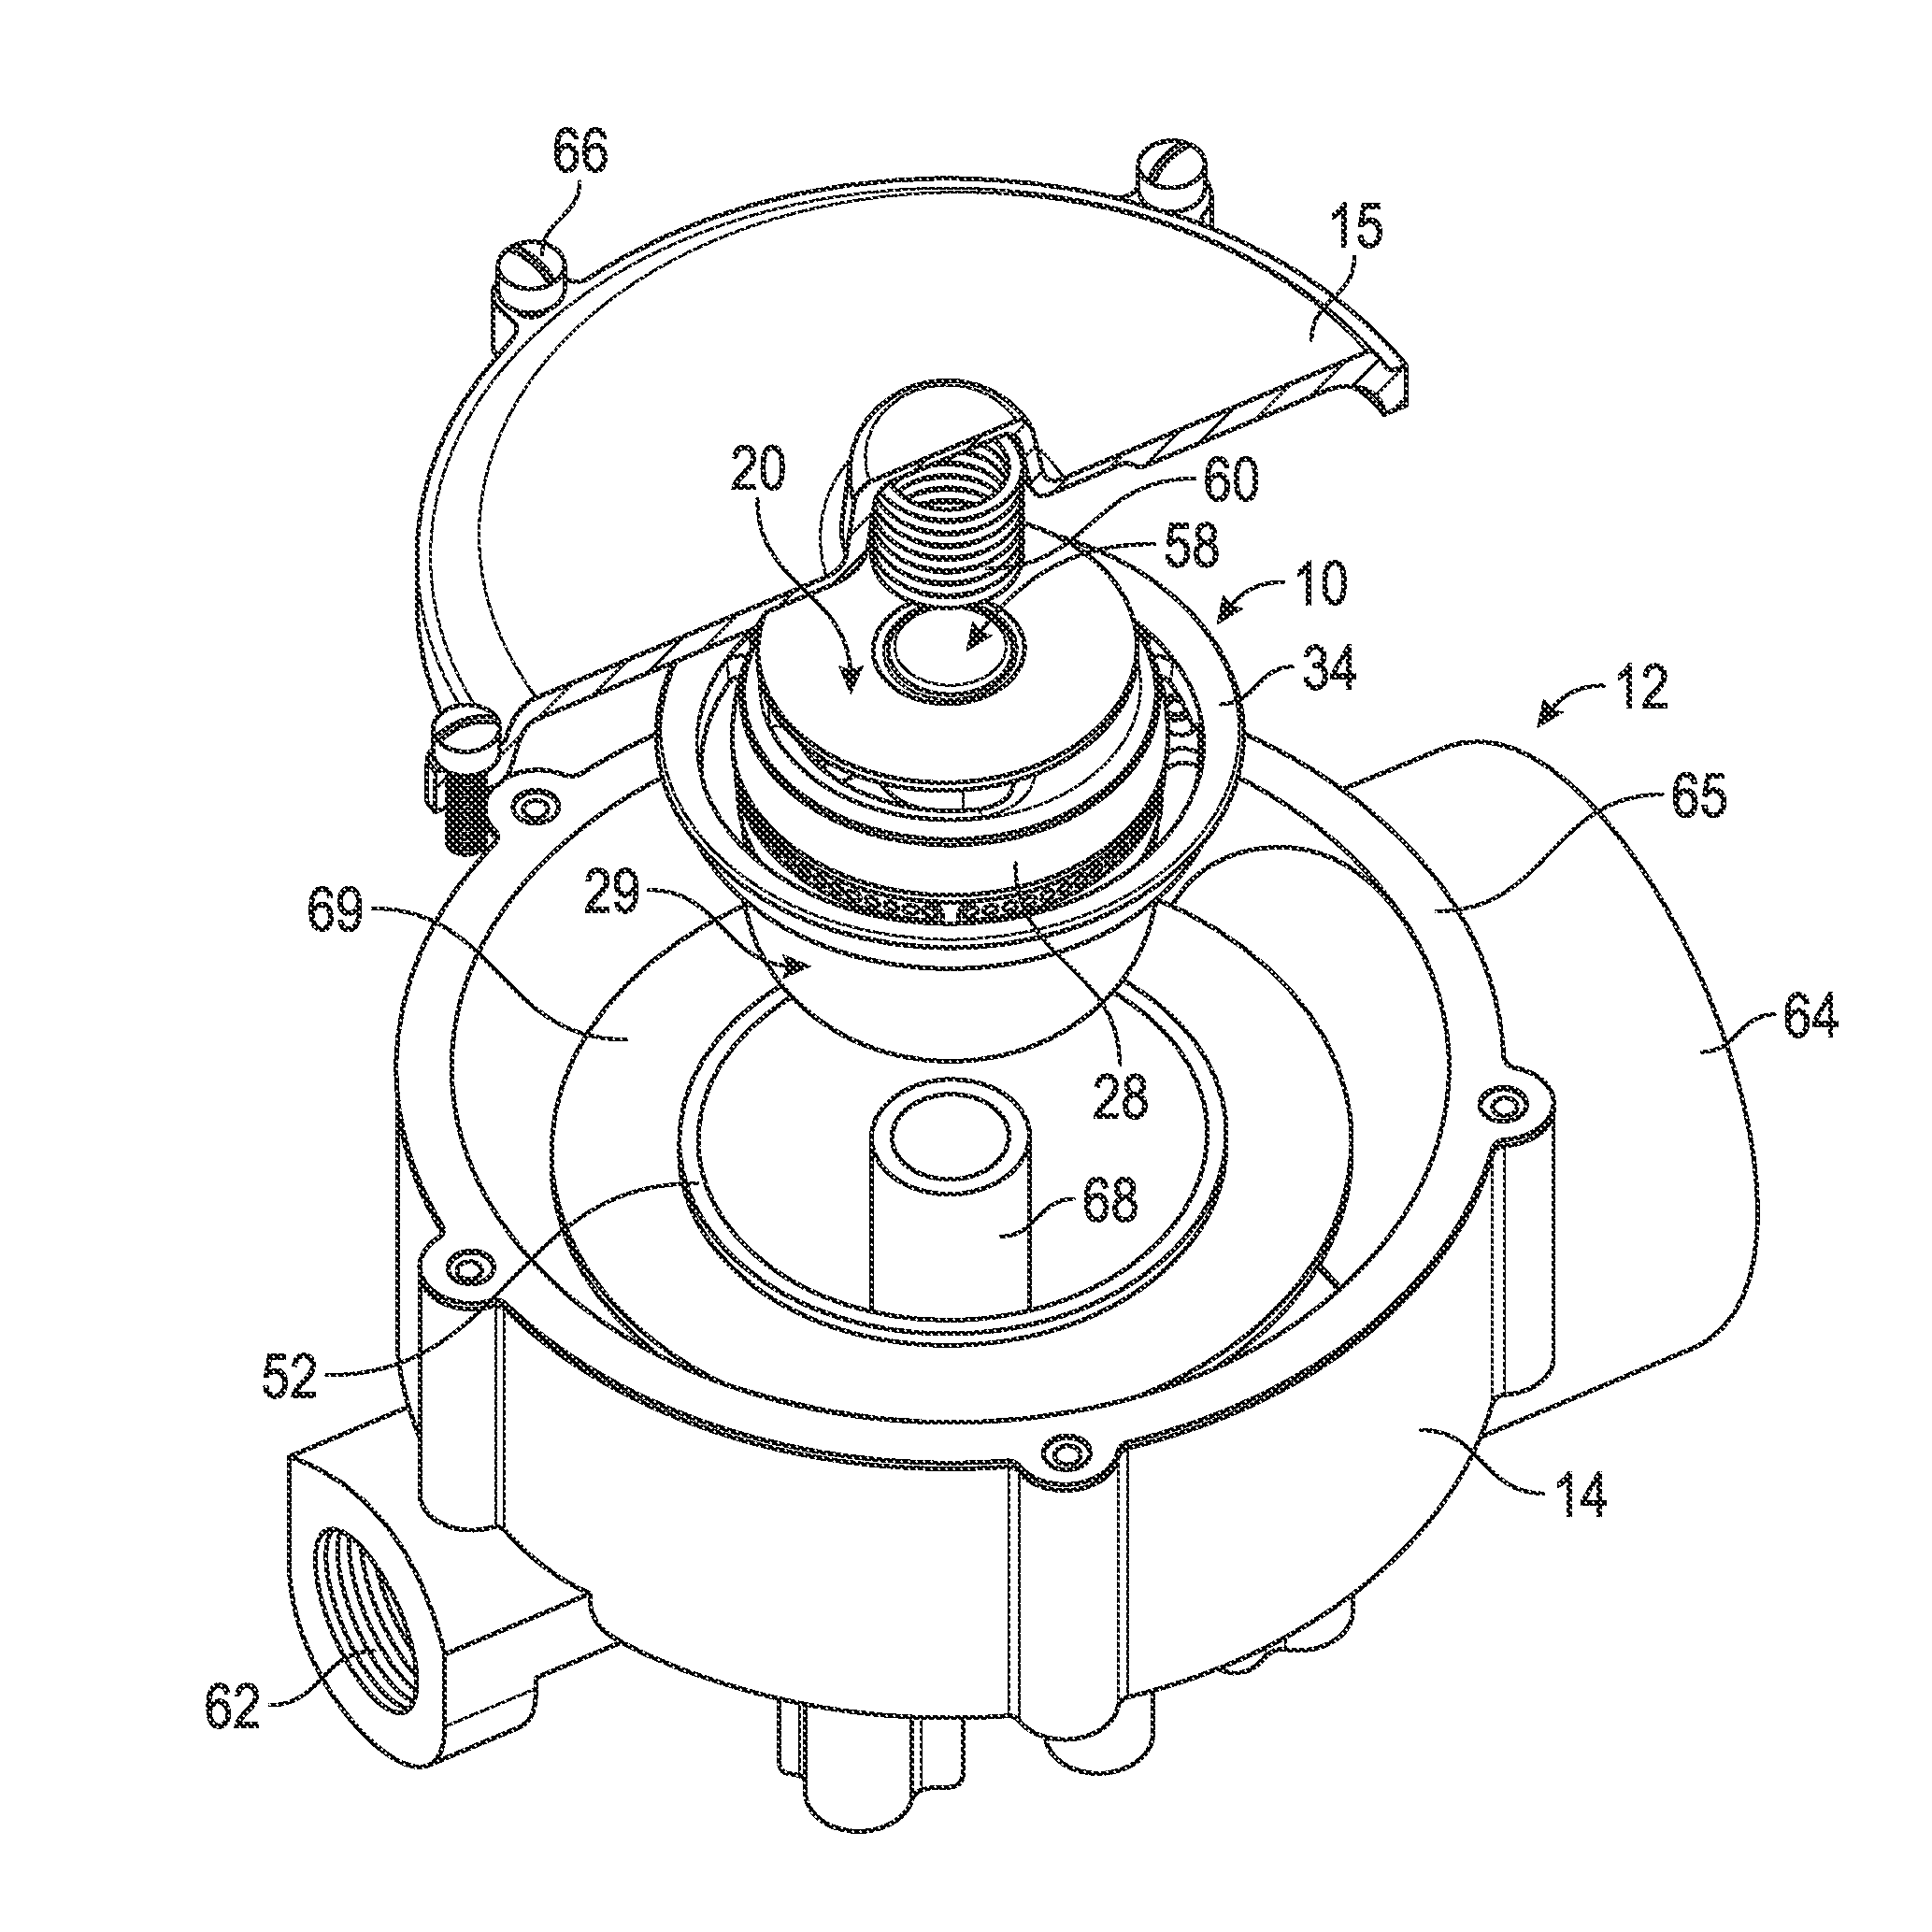 Gaseous fuel and air mixing venturi insert device for carburetor